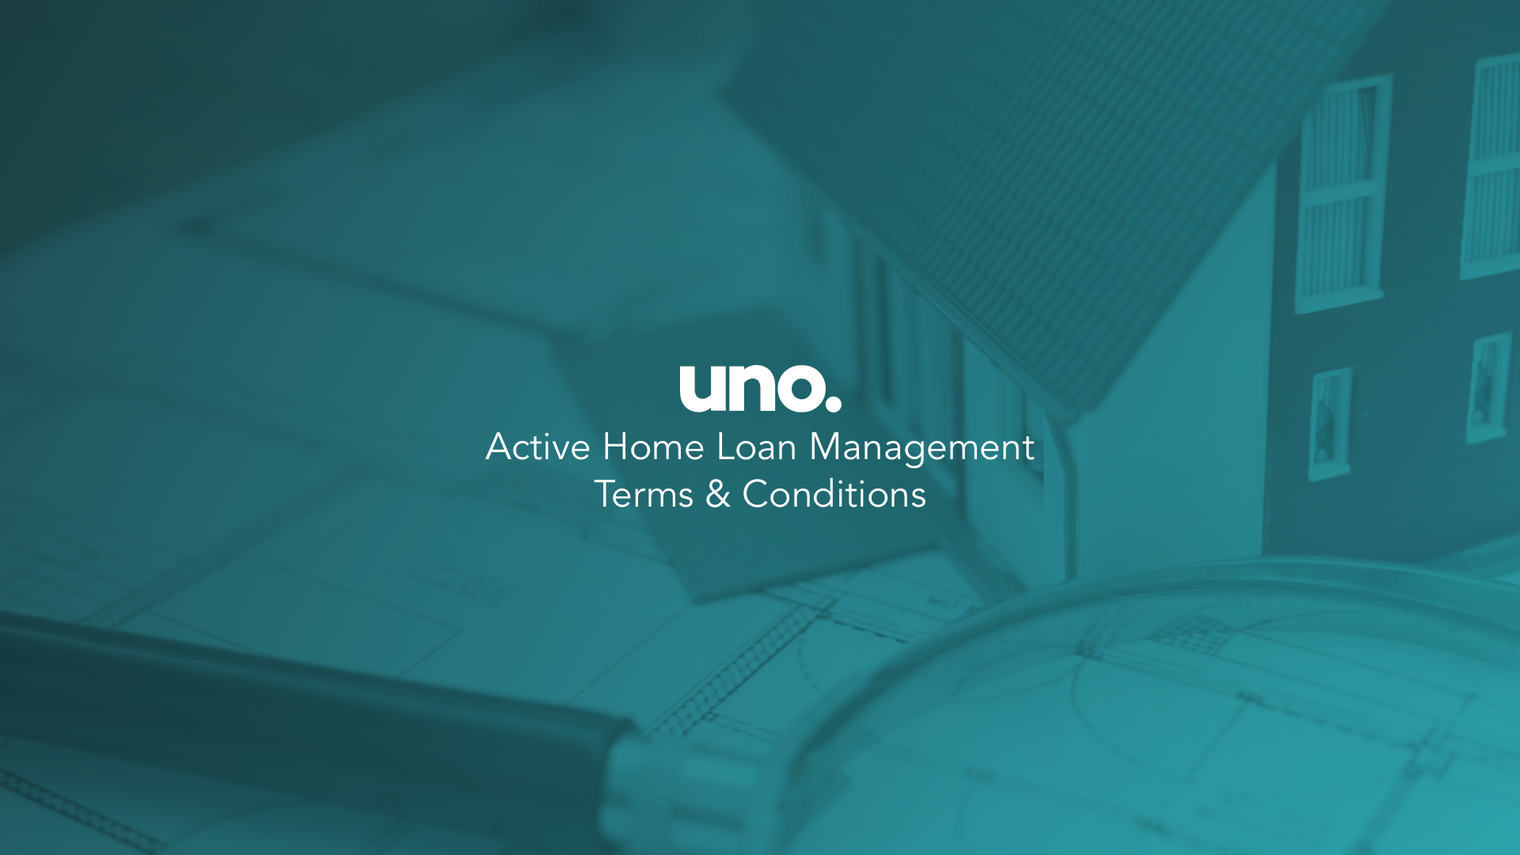 Active Home Loan Management Terms & Conditions